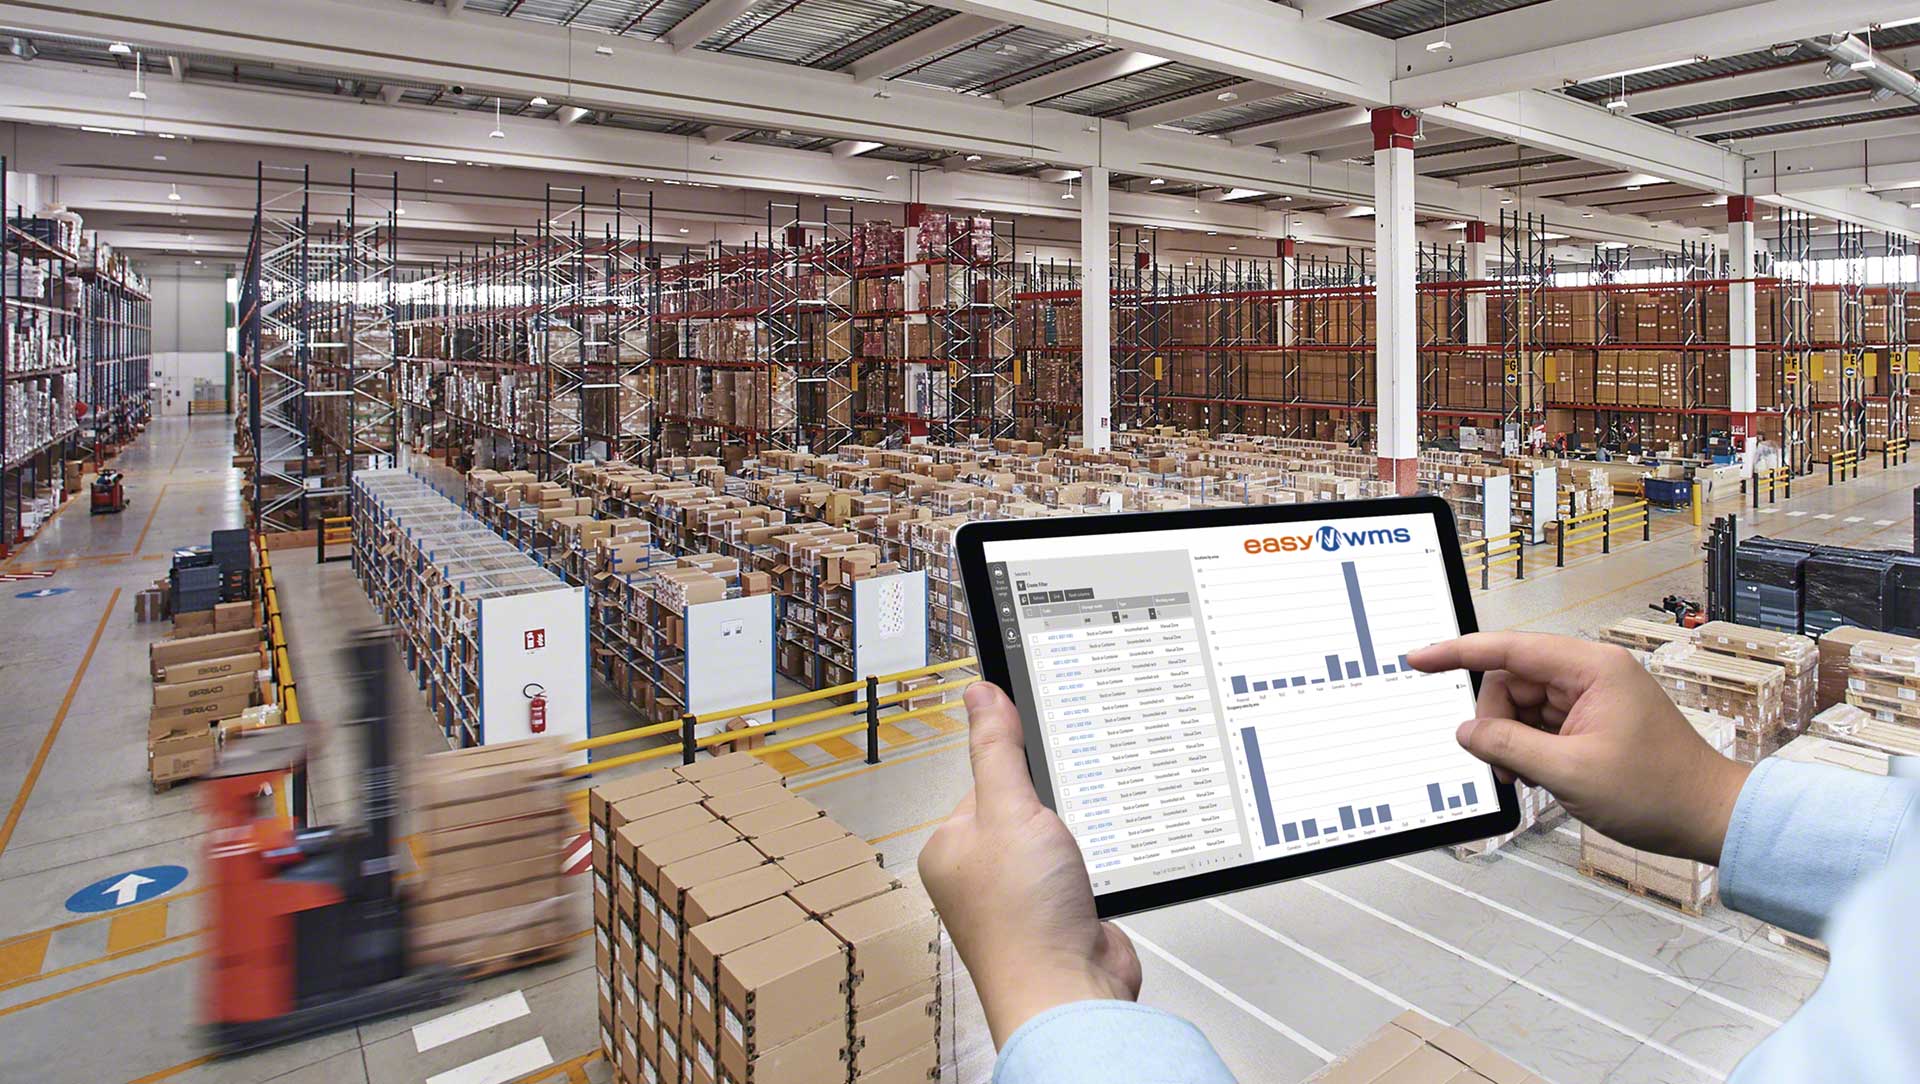 A supply chain diagnostic is a way to detect areas for improvement in the warehouse